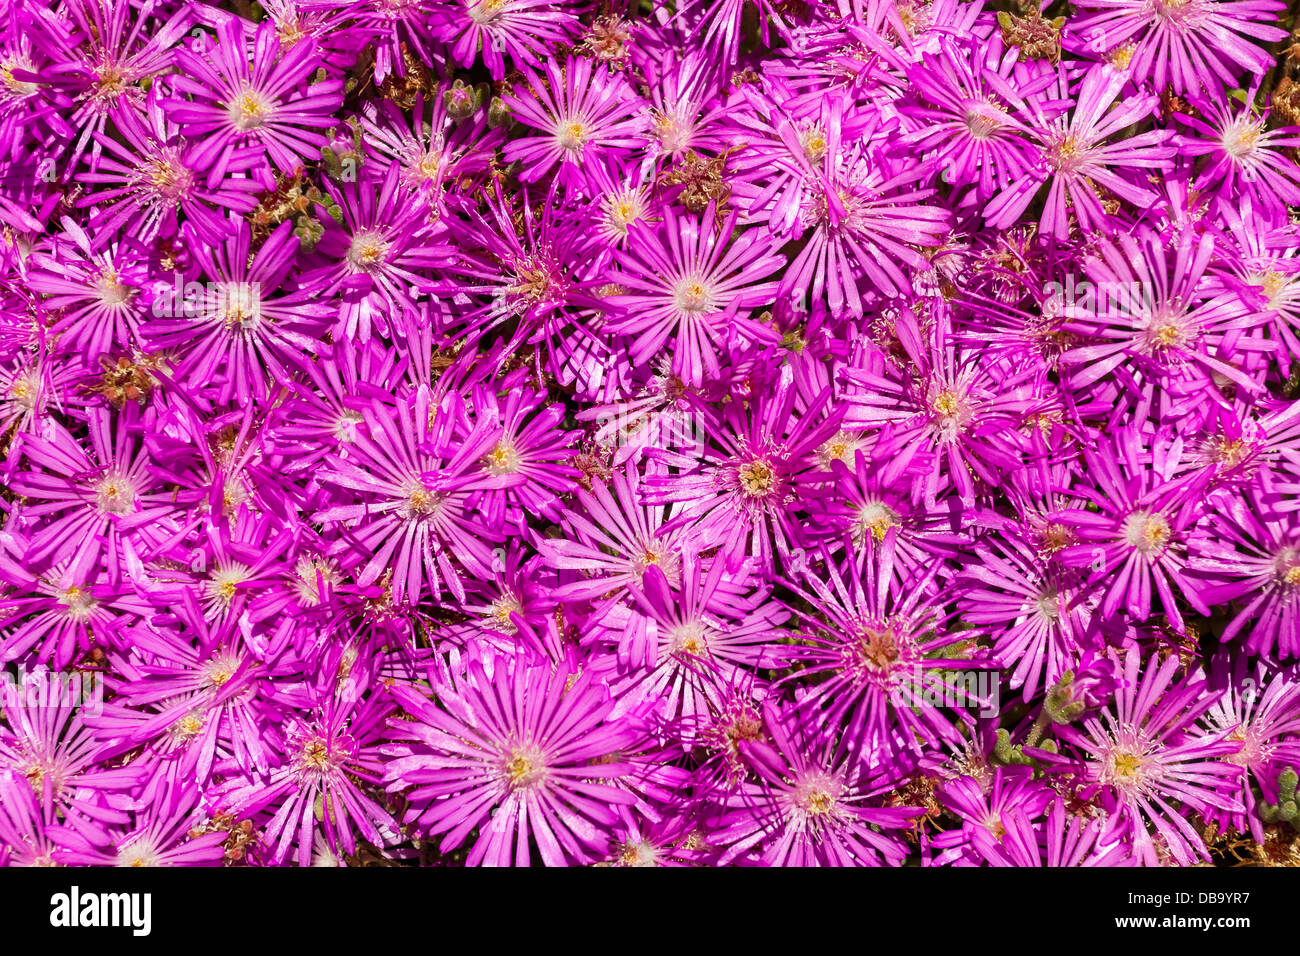 Pink flower bed closeup Stock Photo